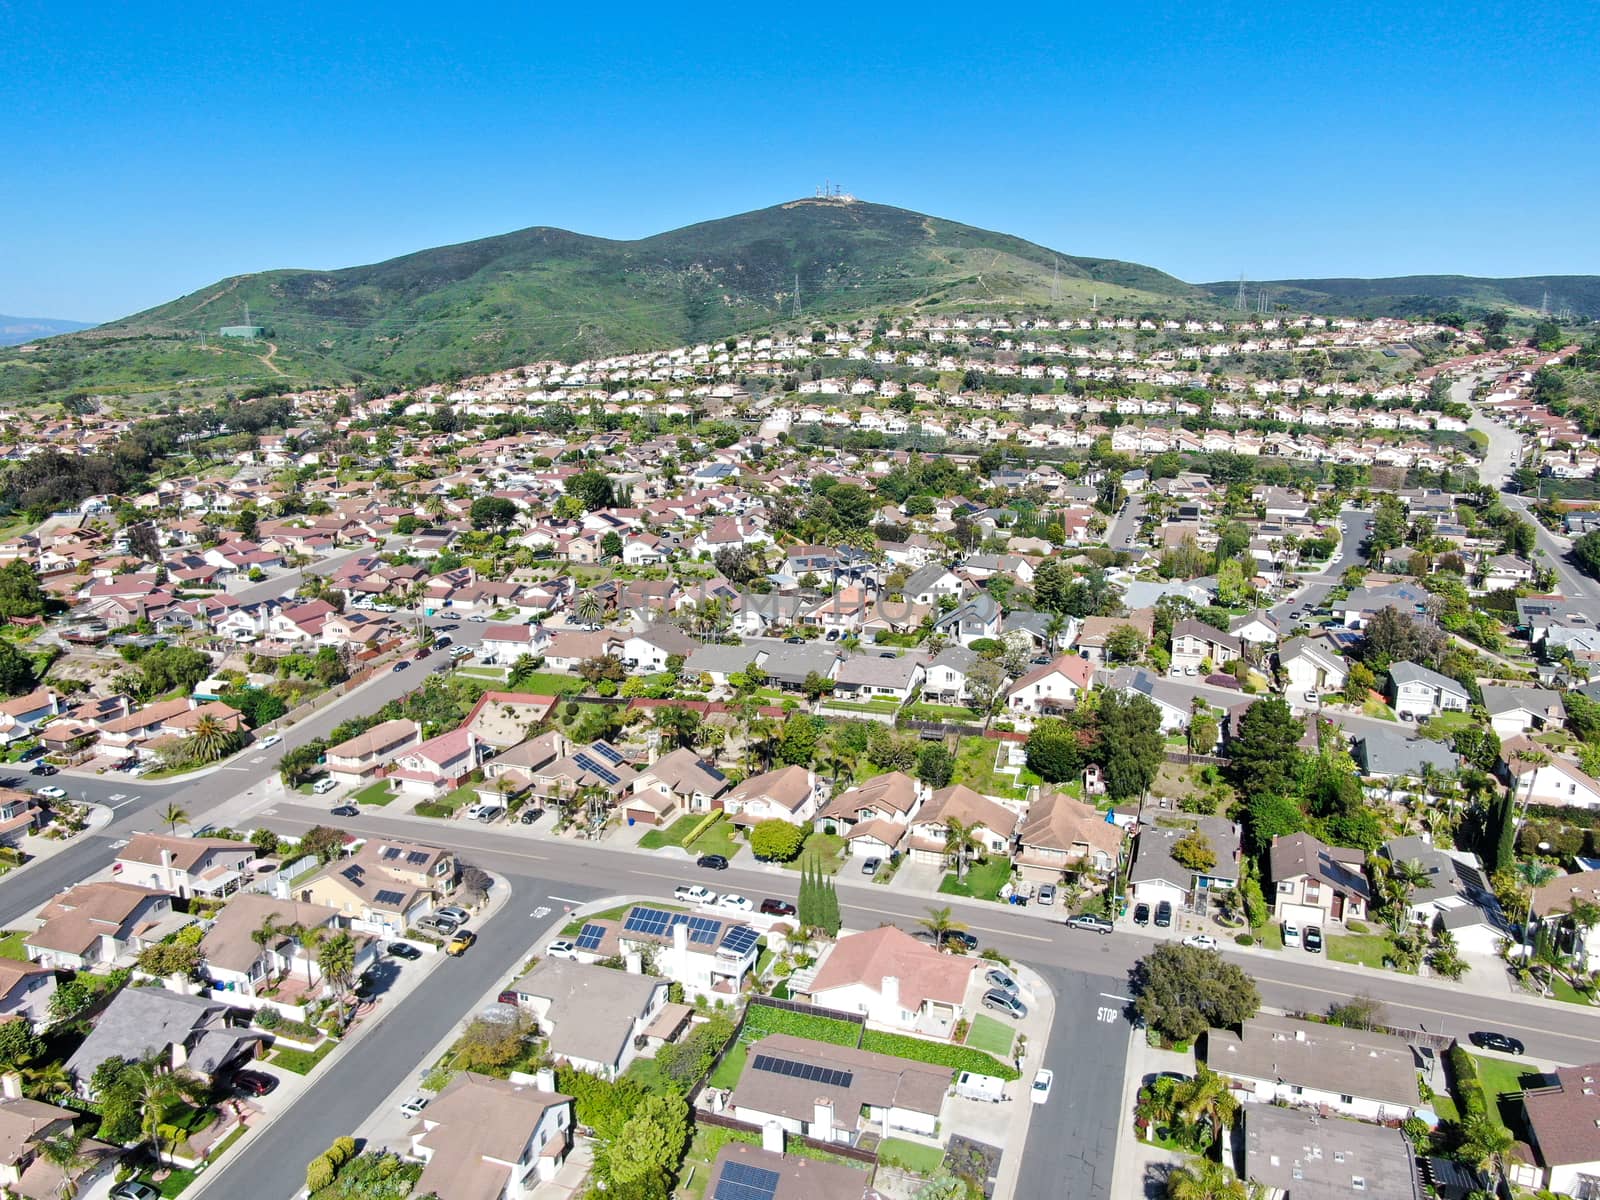 Aerial view of upper middle class neighborhood in the valley with blue sky by Bonandbon